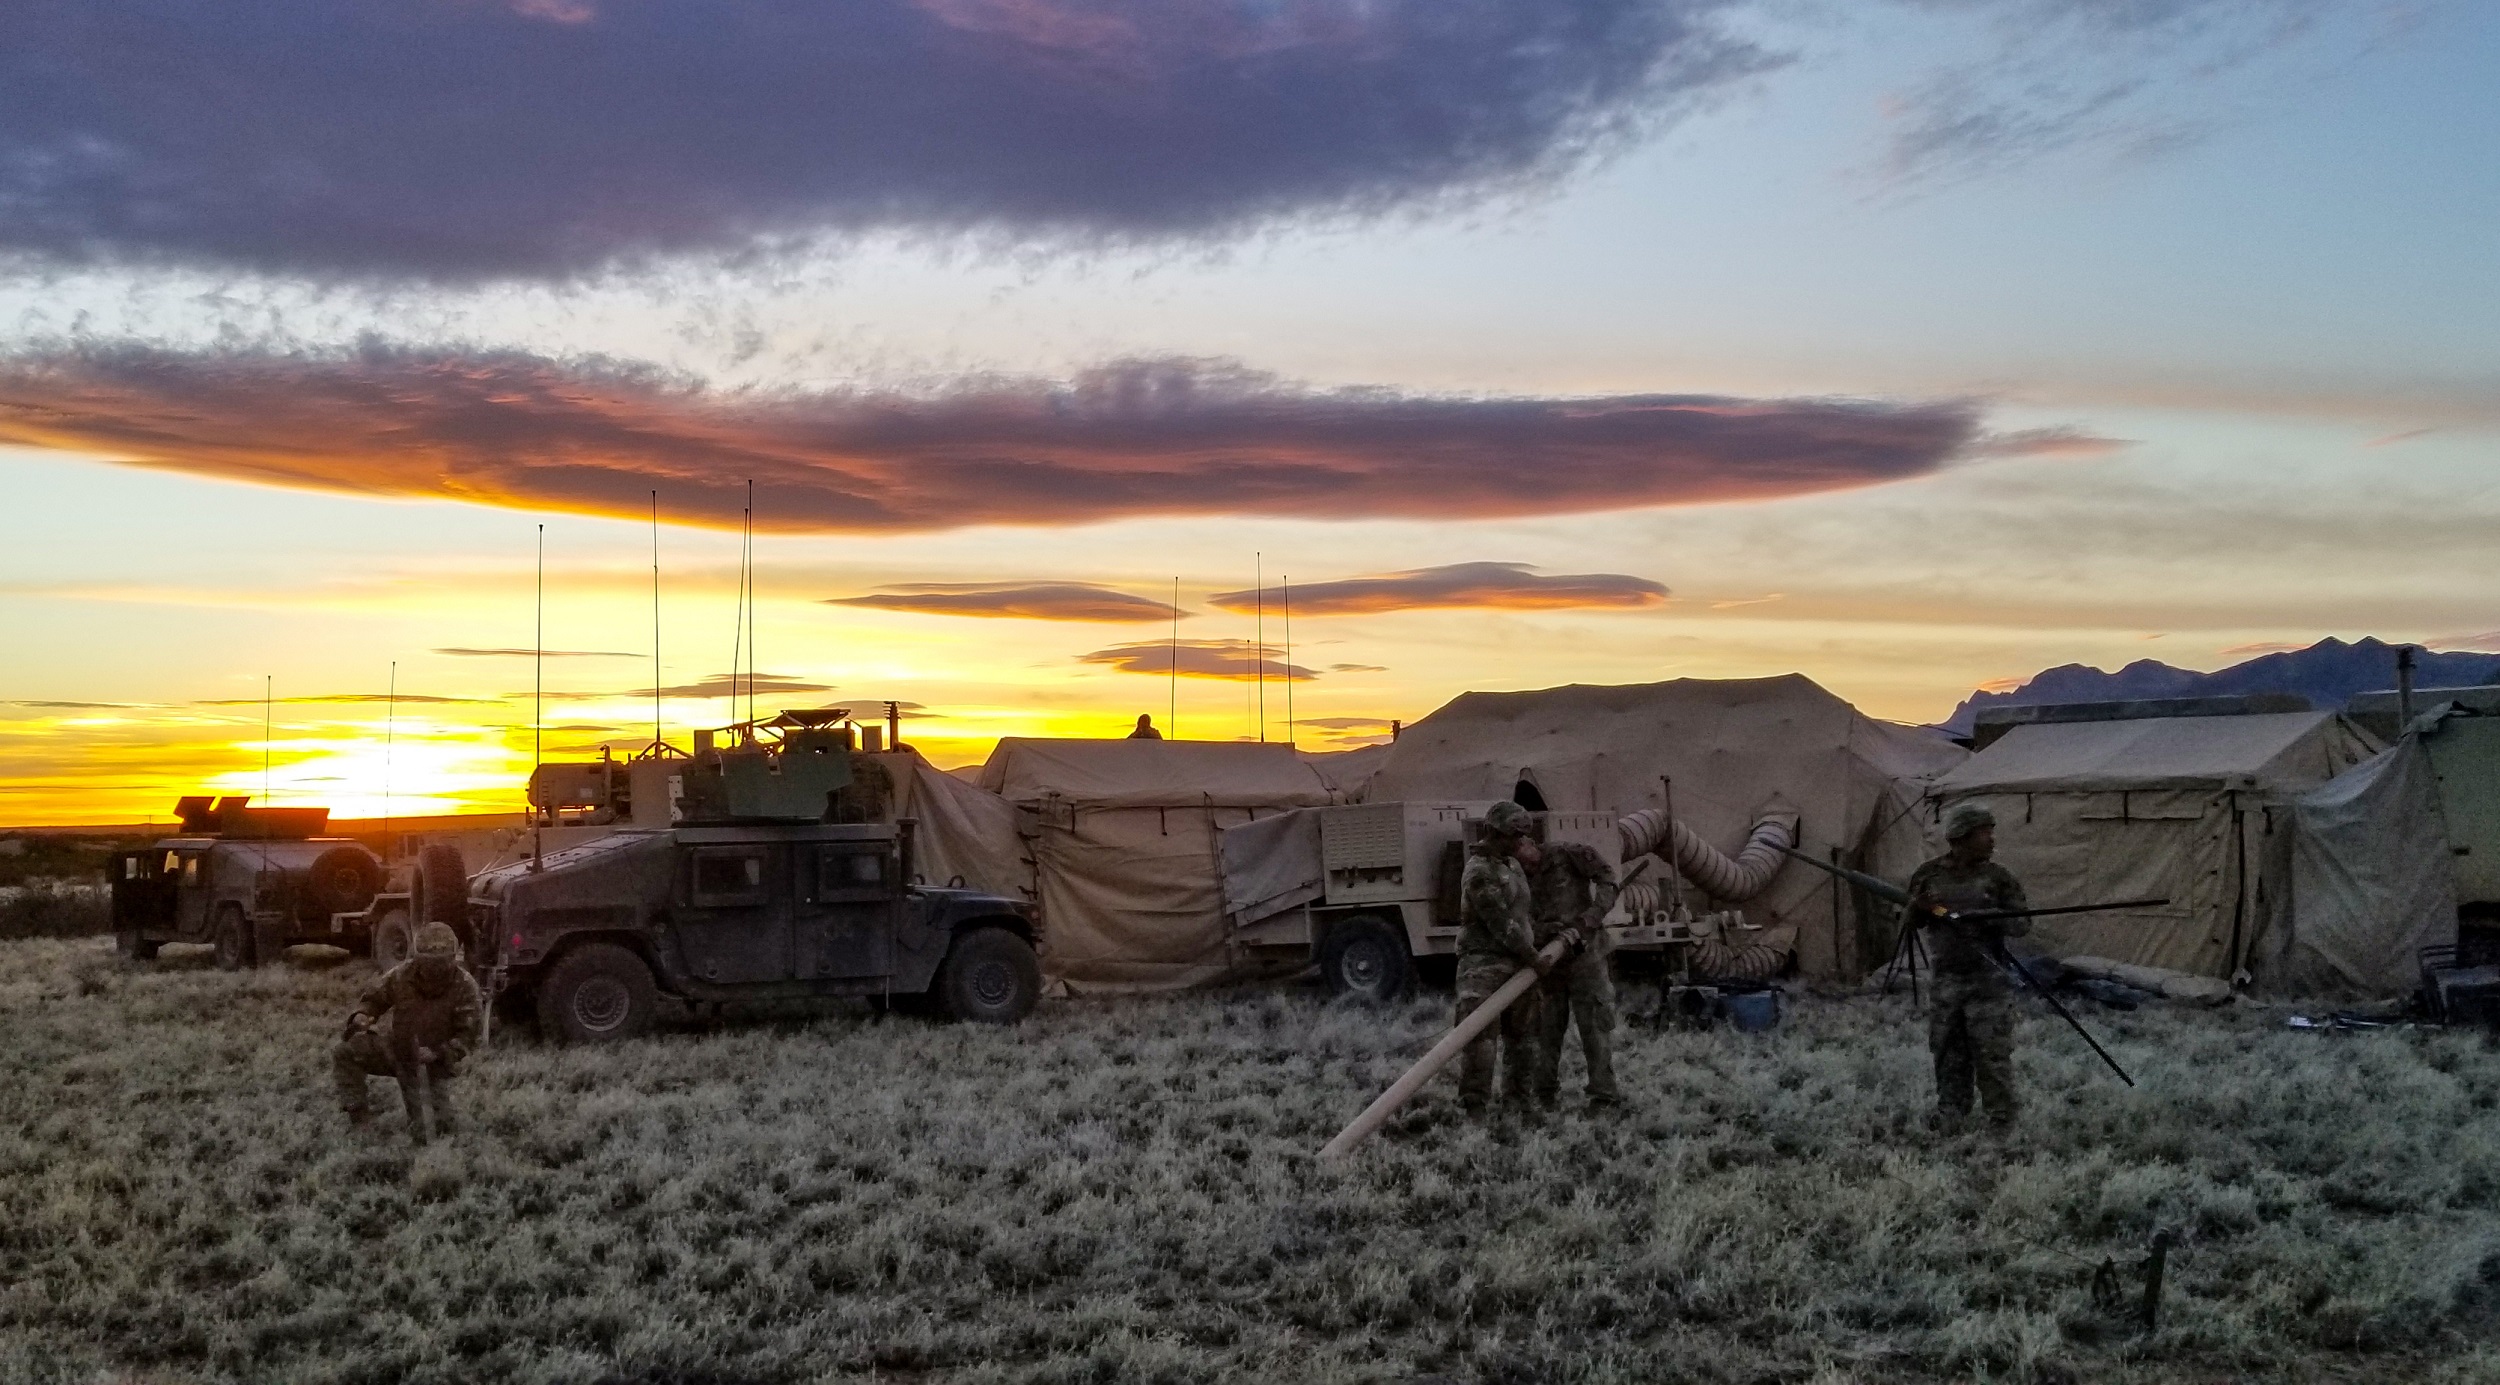 Soldiers assigned to Headquarters Company, 1st Battalion, 155th Infantry Regiment, work to establish communications during a field training exercise near Camp McGregor, N.M., April 6, 2018. (U.S. Army National Guard photo by Sgt. Timothy Russell) 